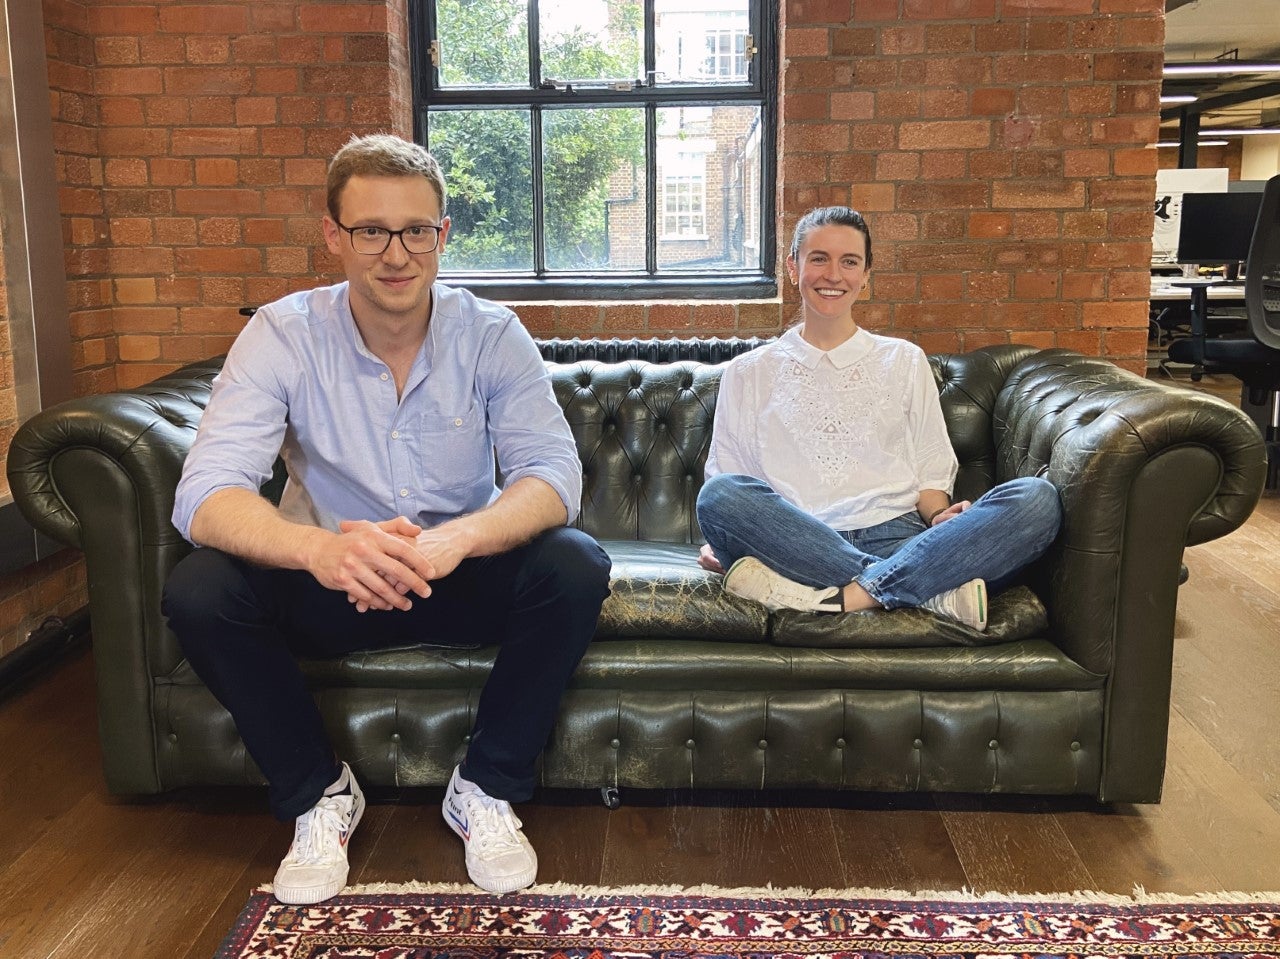 Will and Sophia’s start-up aims to make (property) dreams come true